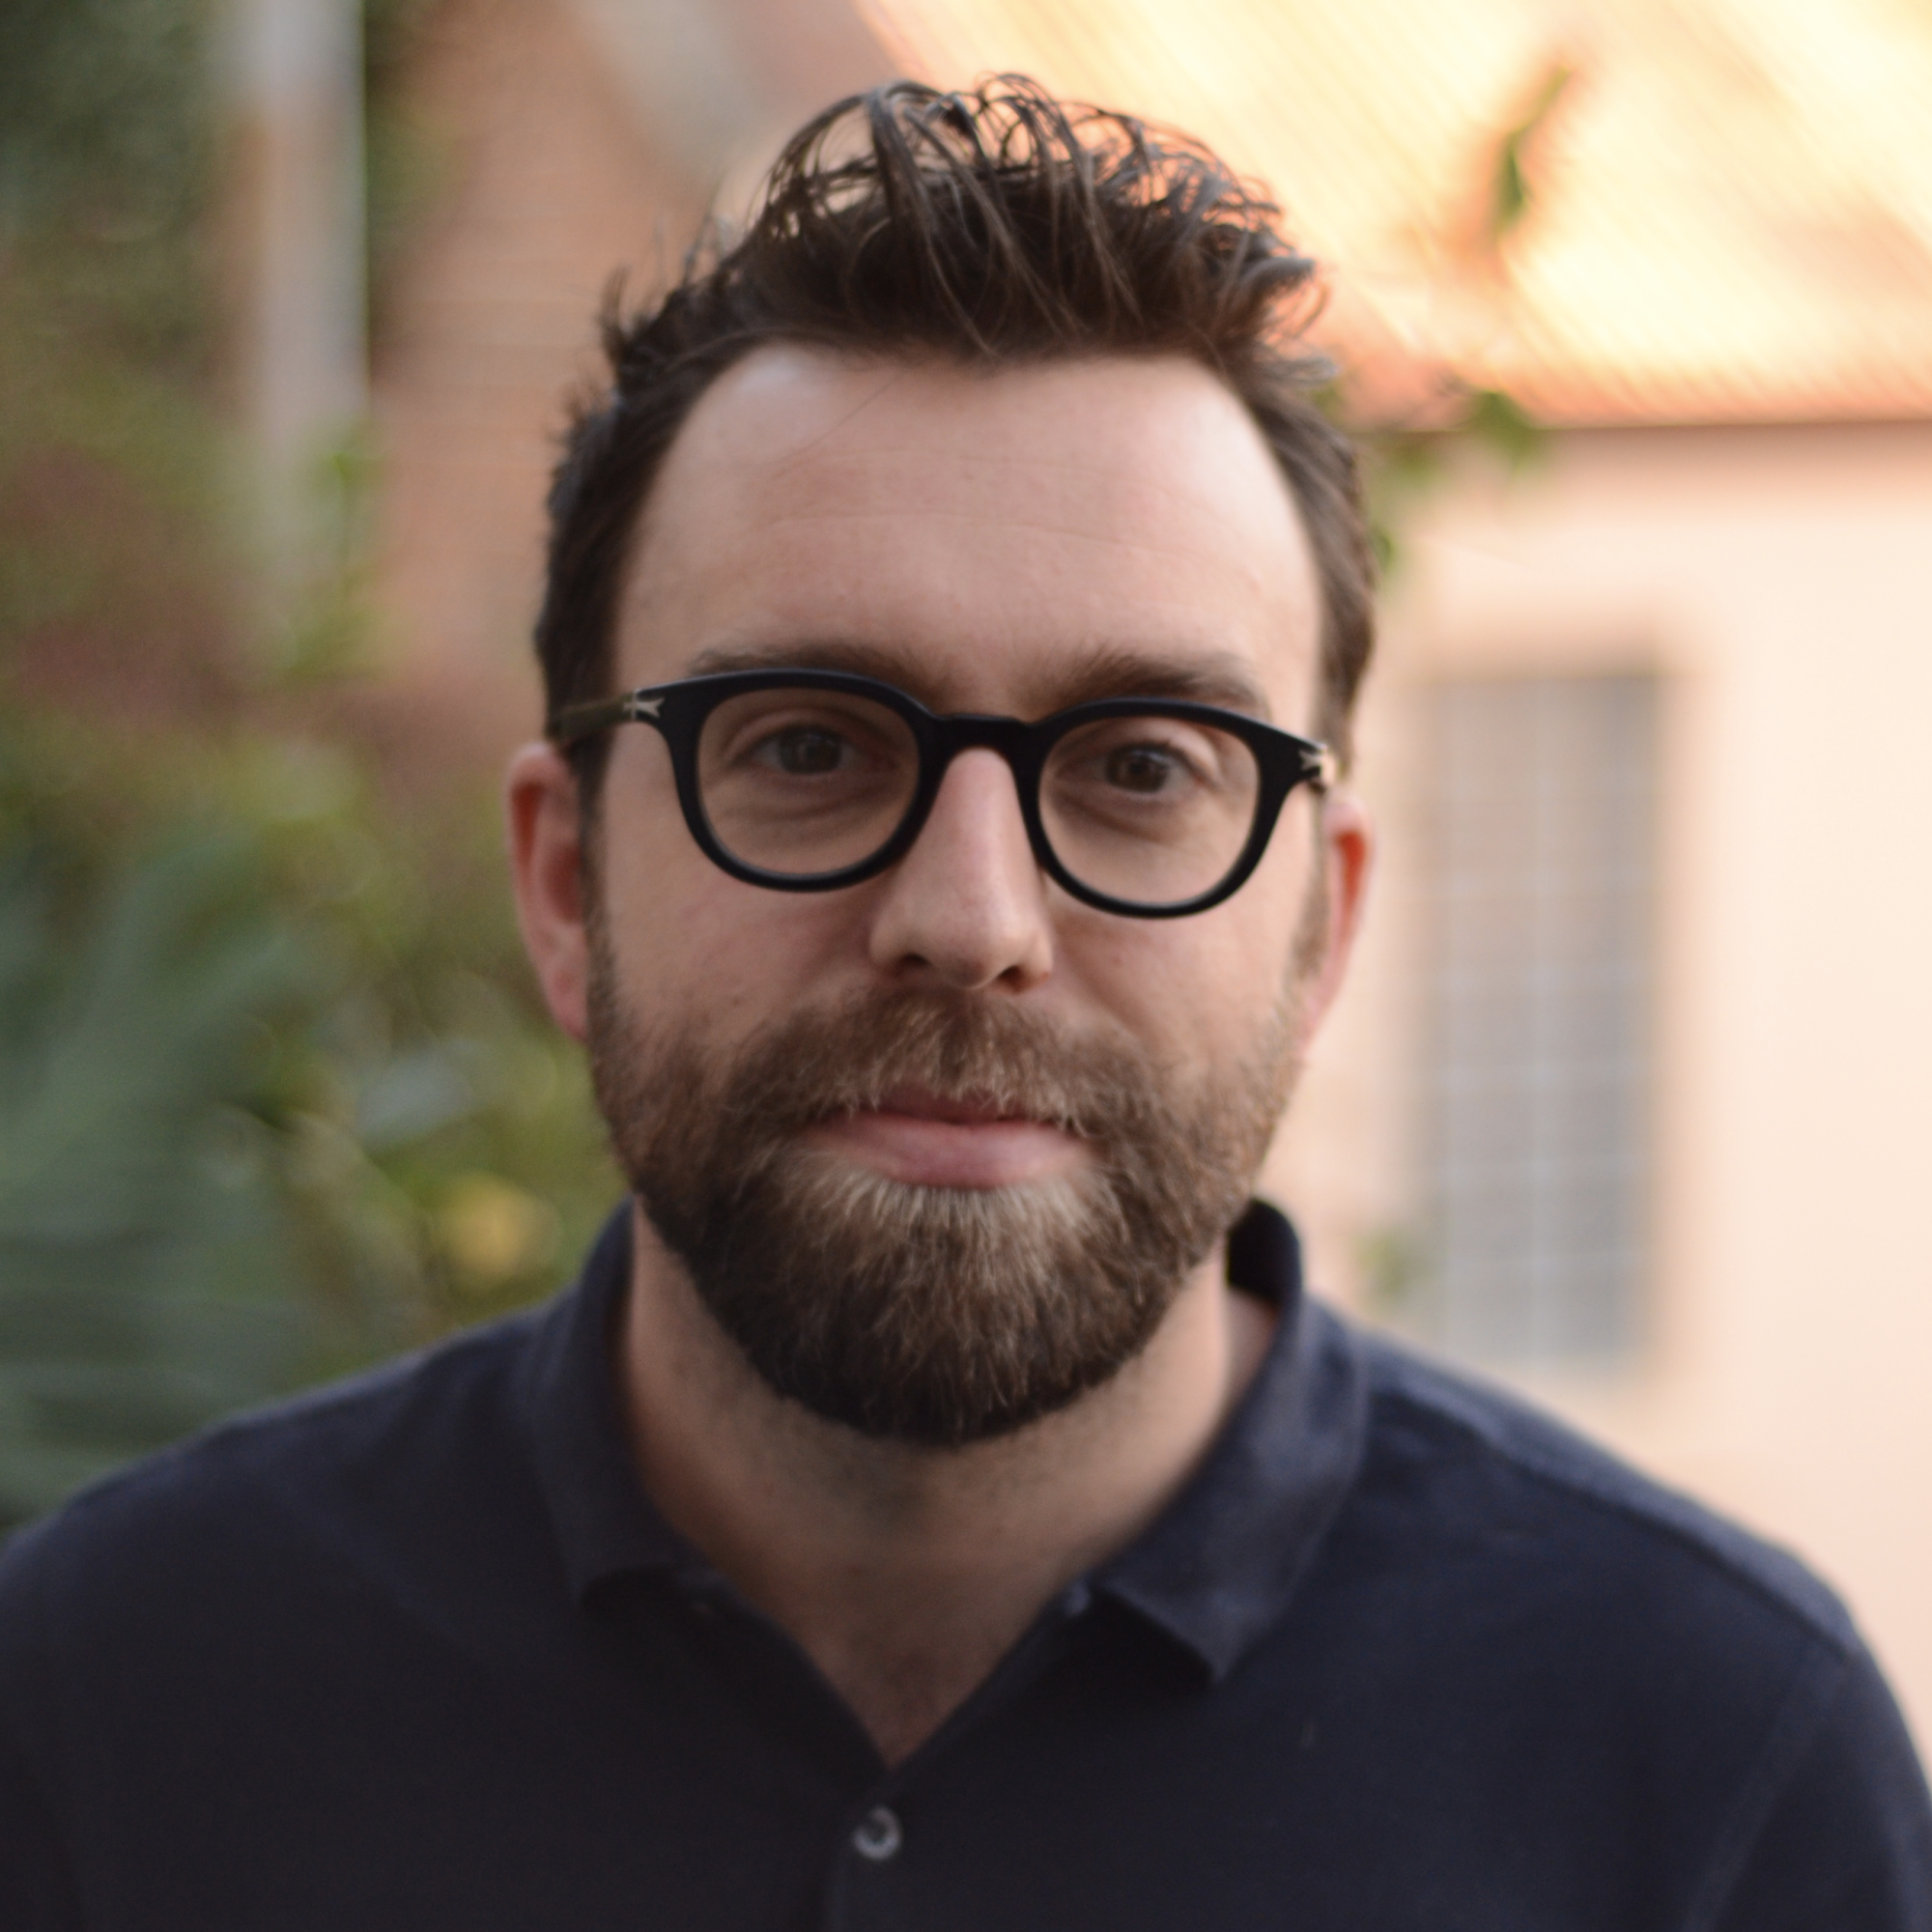 Headshot of white millennial man with glasses outdoors